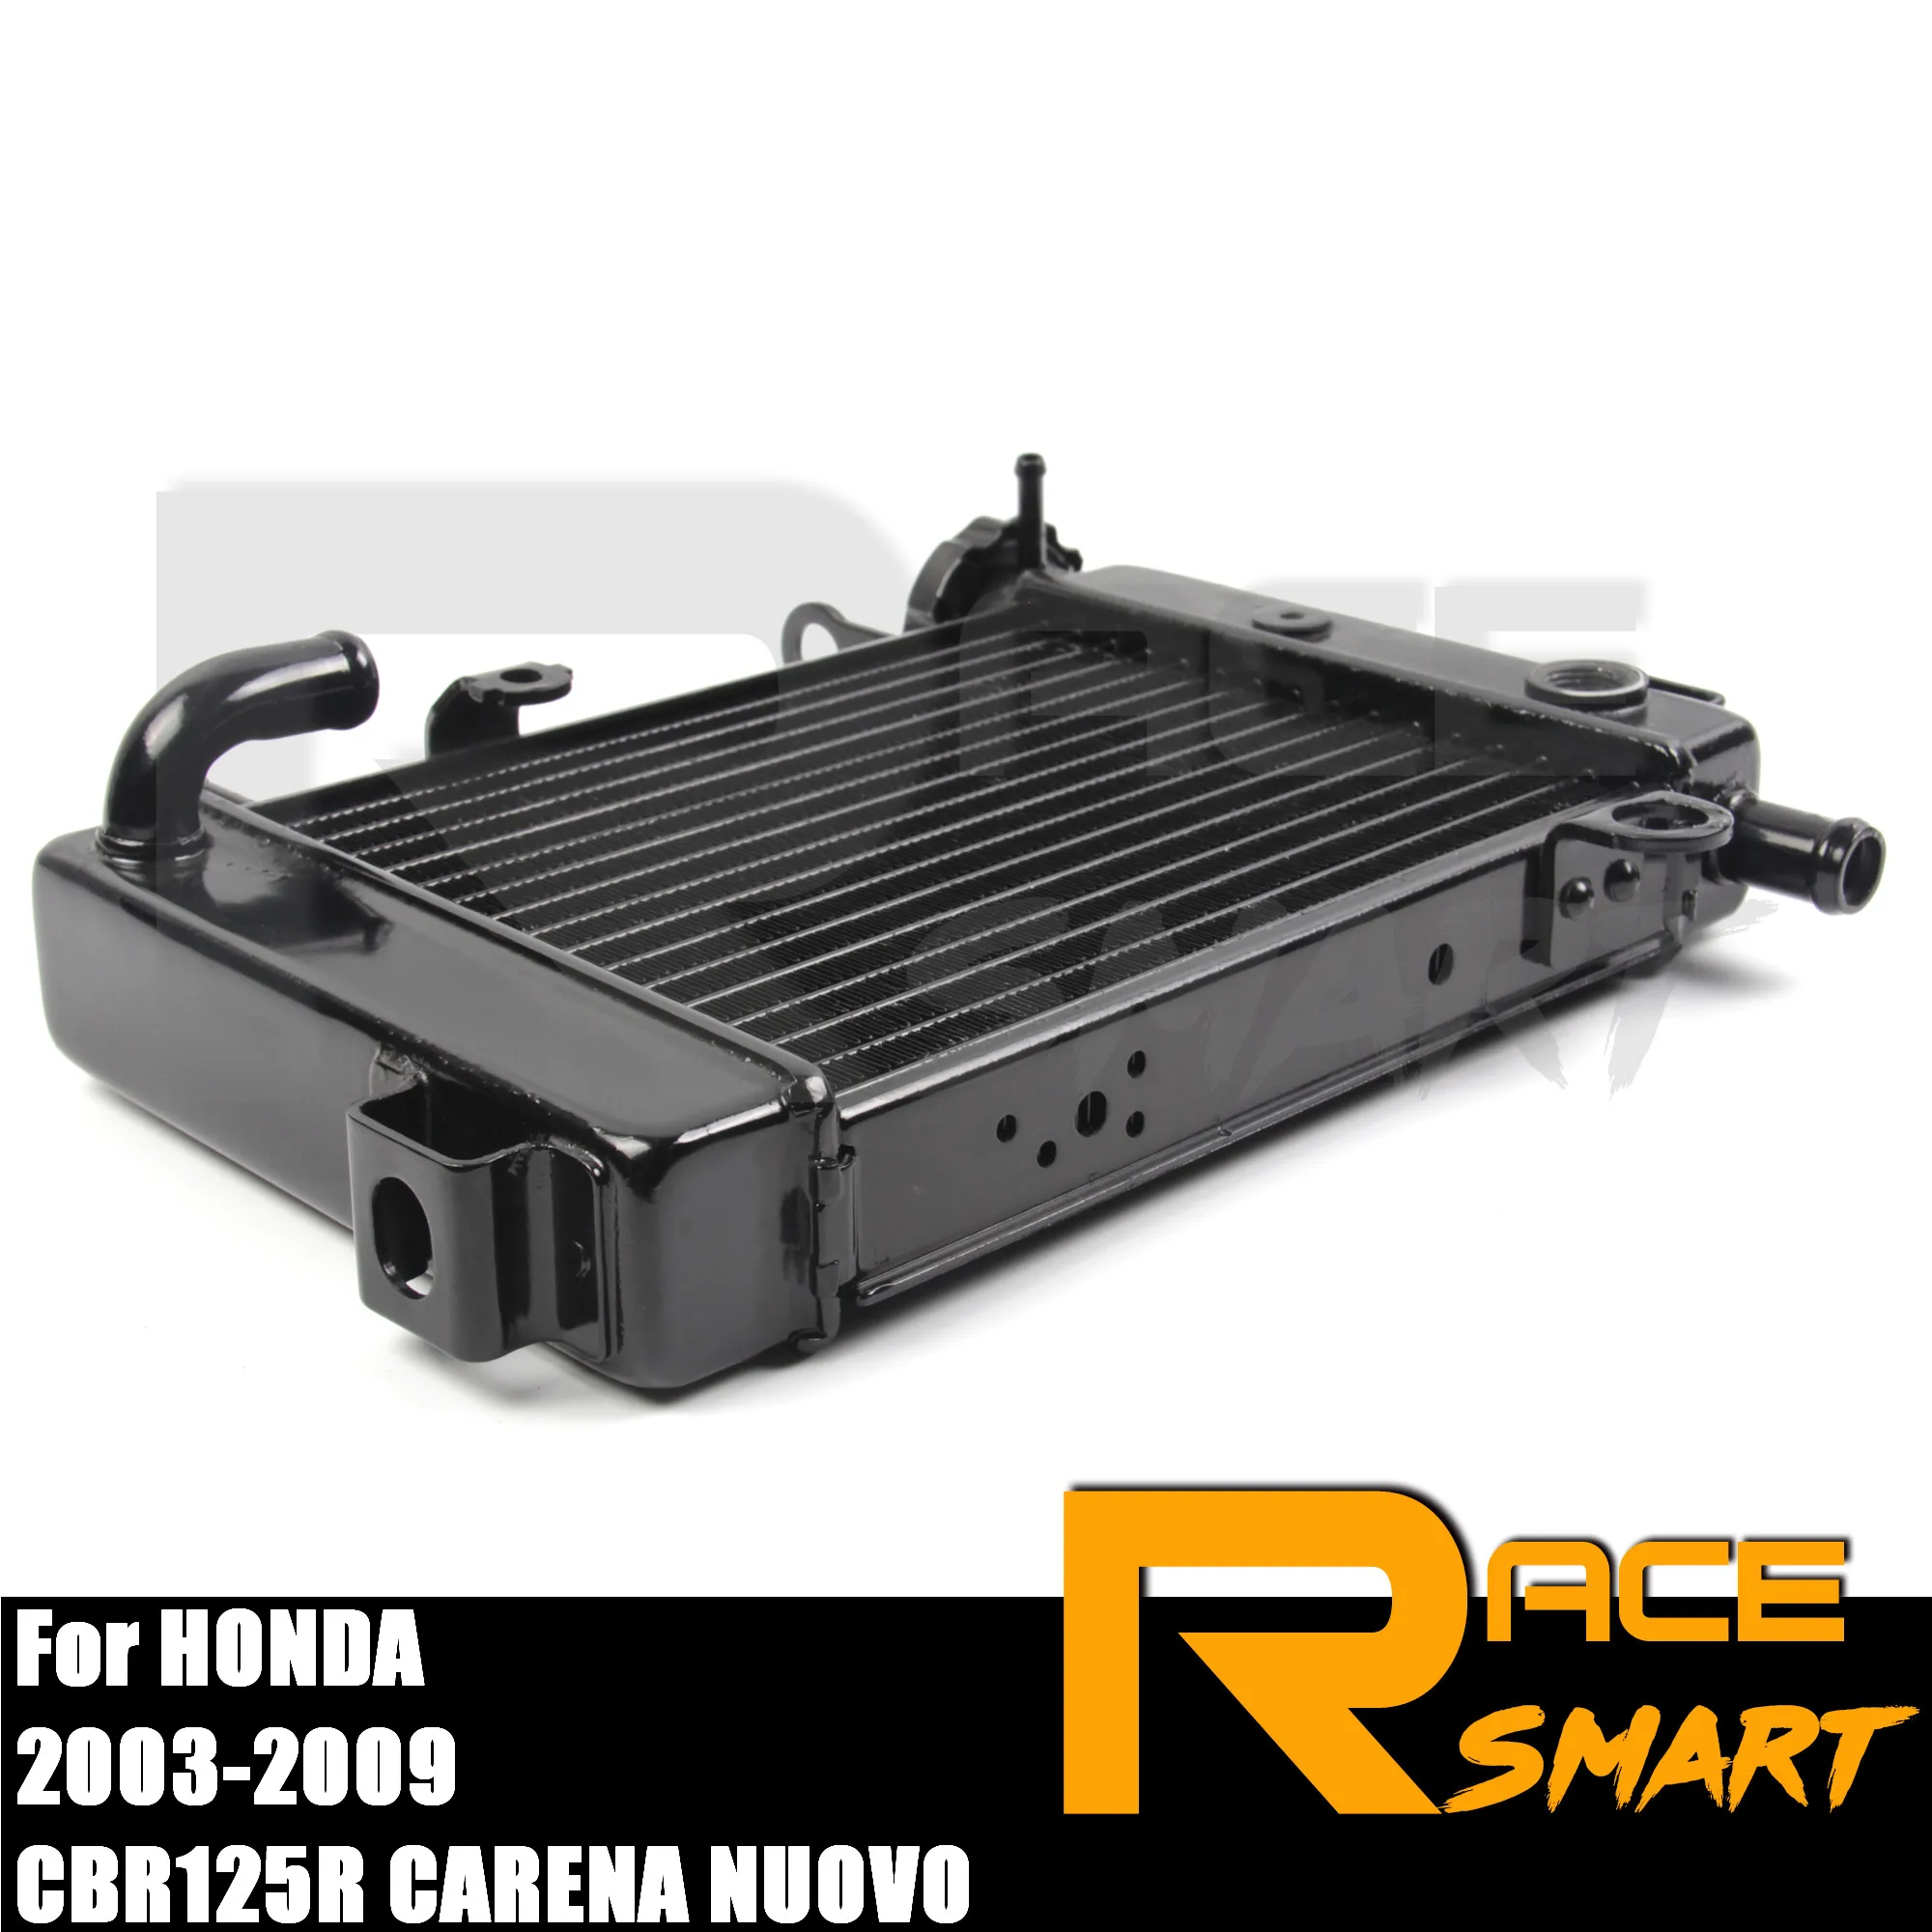 

CBR125R CARENA NUOVO 2003-2009 Motorcycle Radiator Engine Water Cooling Cooler System CBR 125R CBR125-R 2004 2005 2006 2007 2008